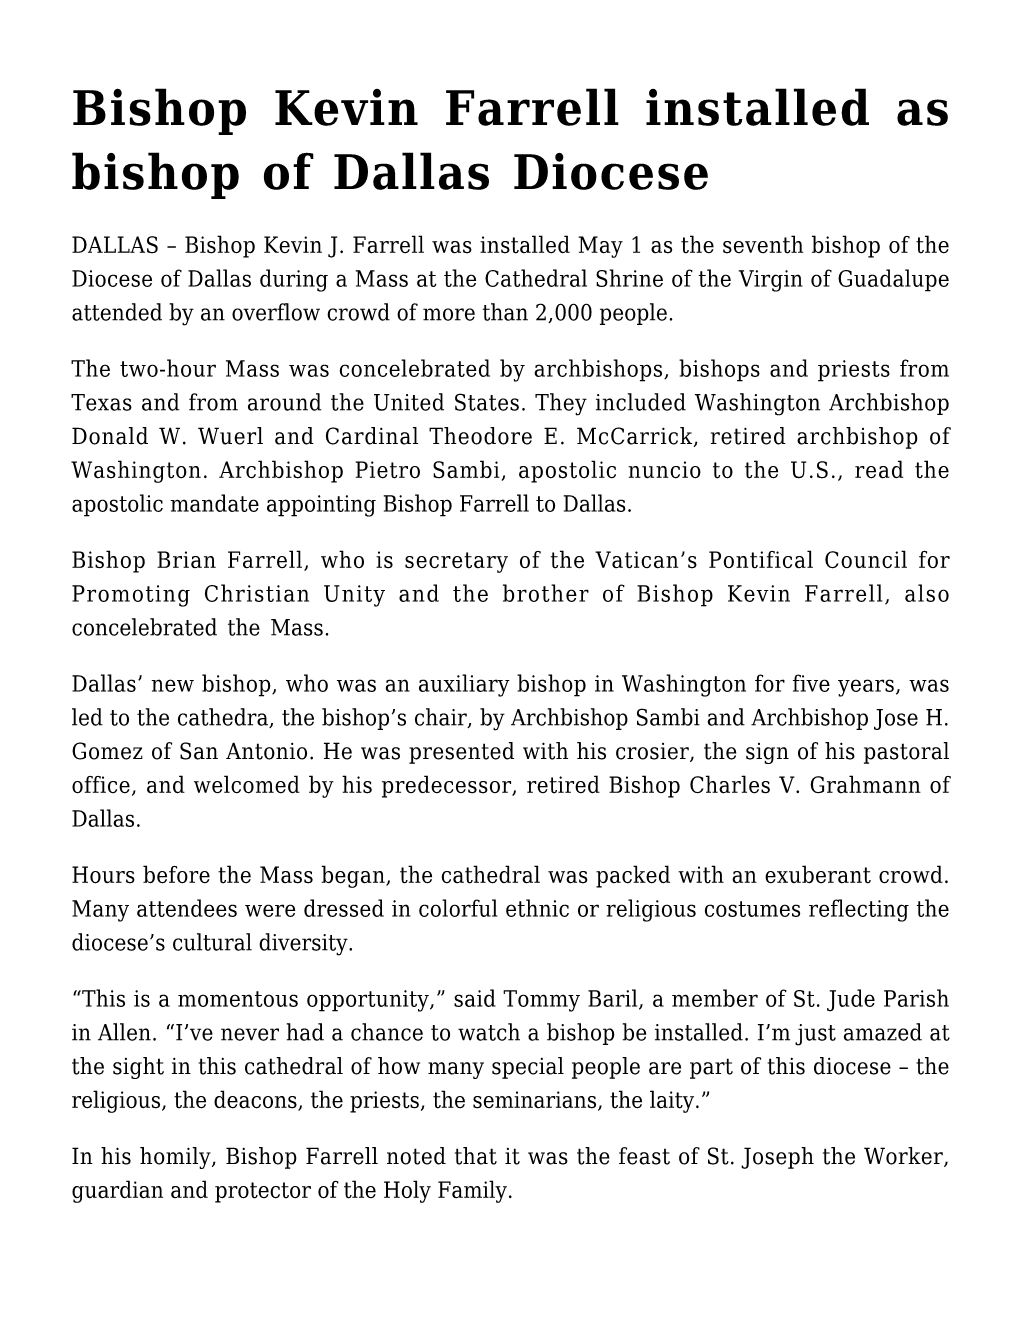 Bishop Kevin Farrell Installed As Bishop of Dallas Diocese